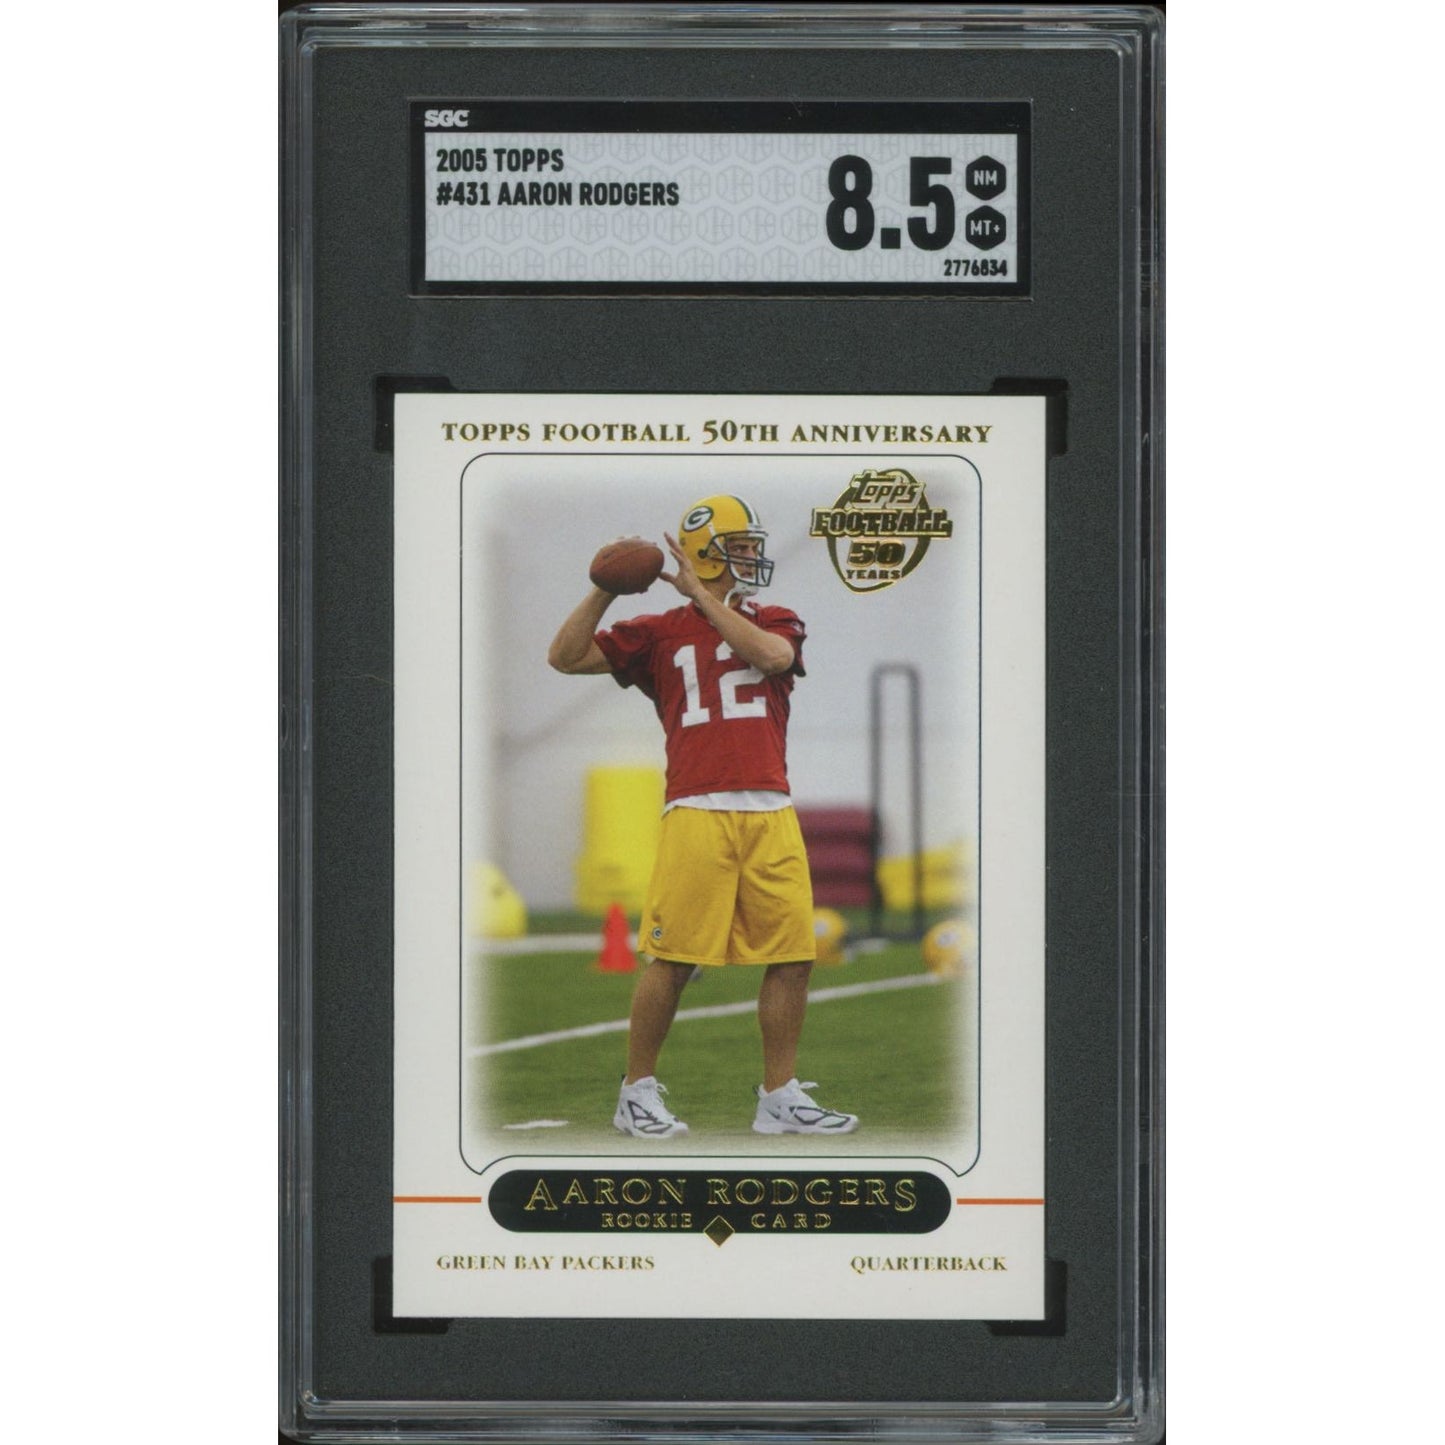 2005 Topps Aaron Rodgers #431 SGC 8.5 RC